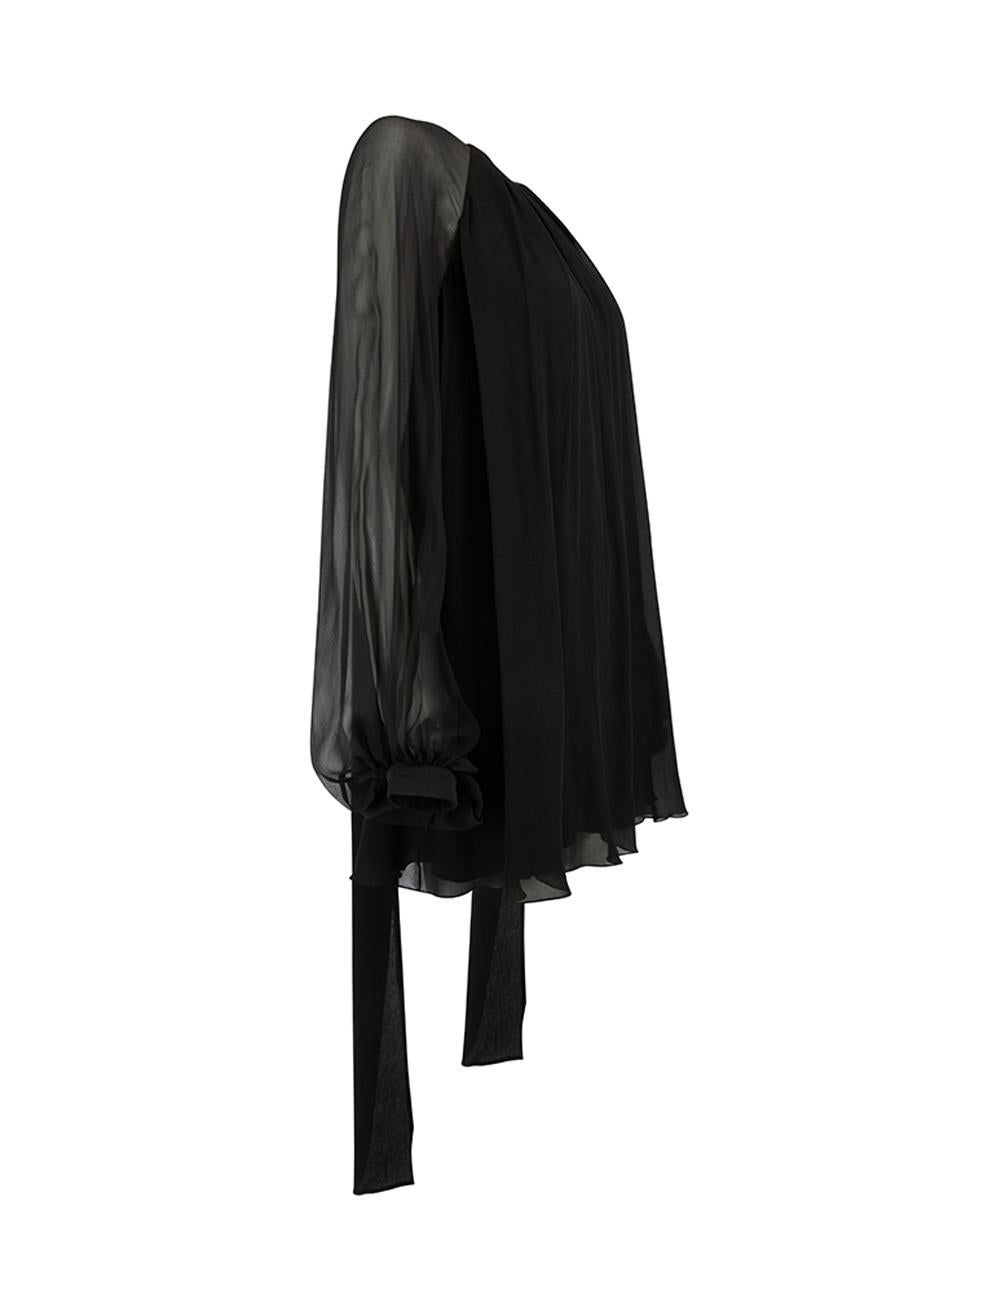 CONDITION is Very good. Minimal wear to dress is evident. Minimal wear to the sheer sleeves on this used Saint Laurent designer resale item. Details Black Silk Long sleeves blouse Gathered cuffs with button closure Round neckline Back shoulder snap